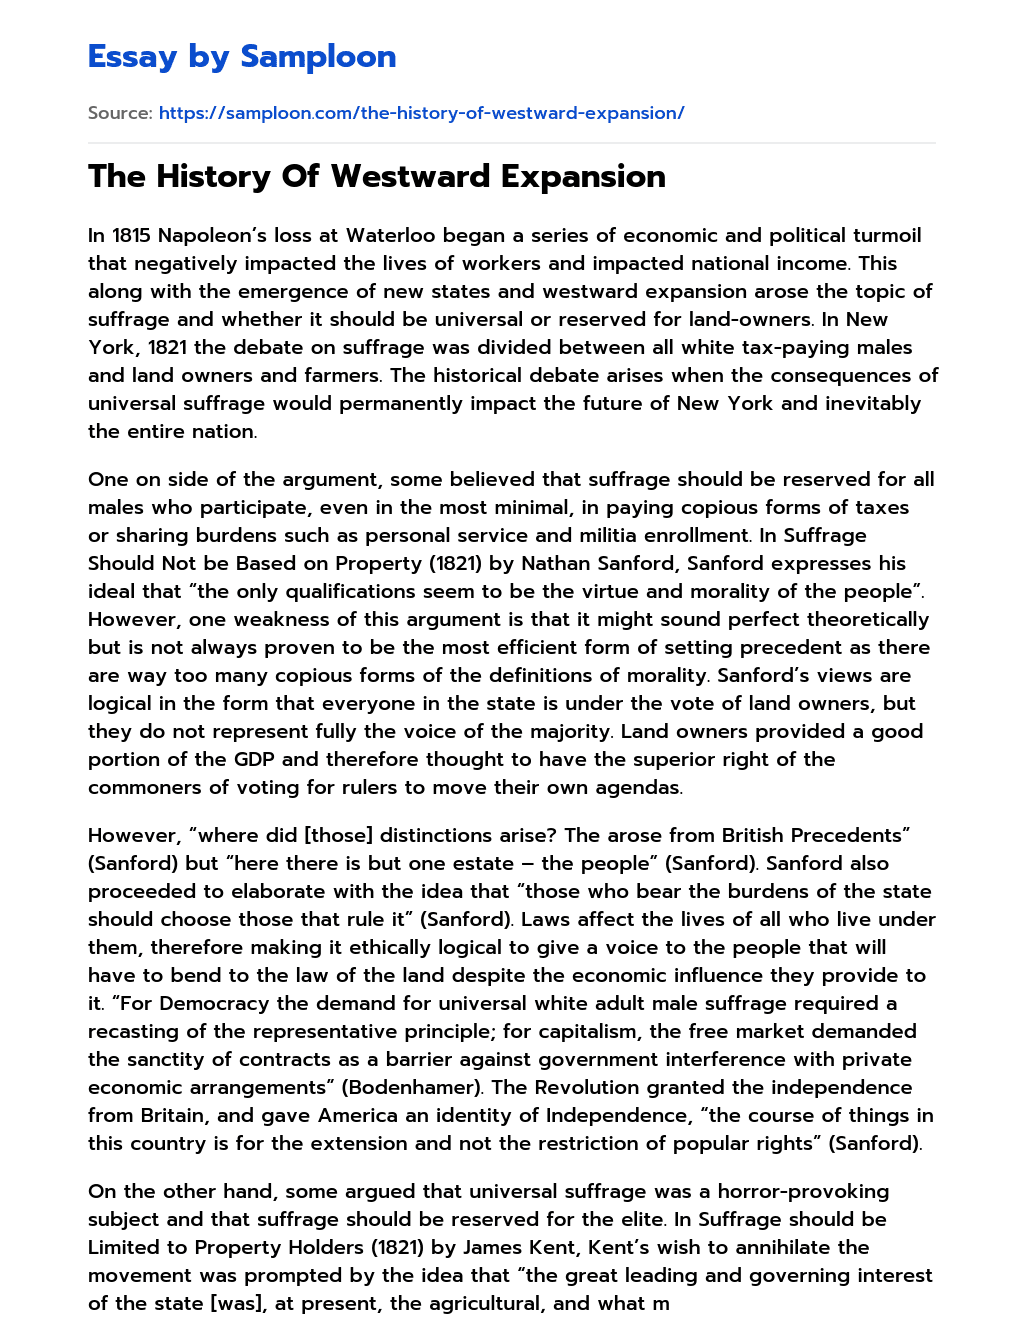 The History Of Westward Expansion essay